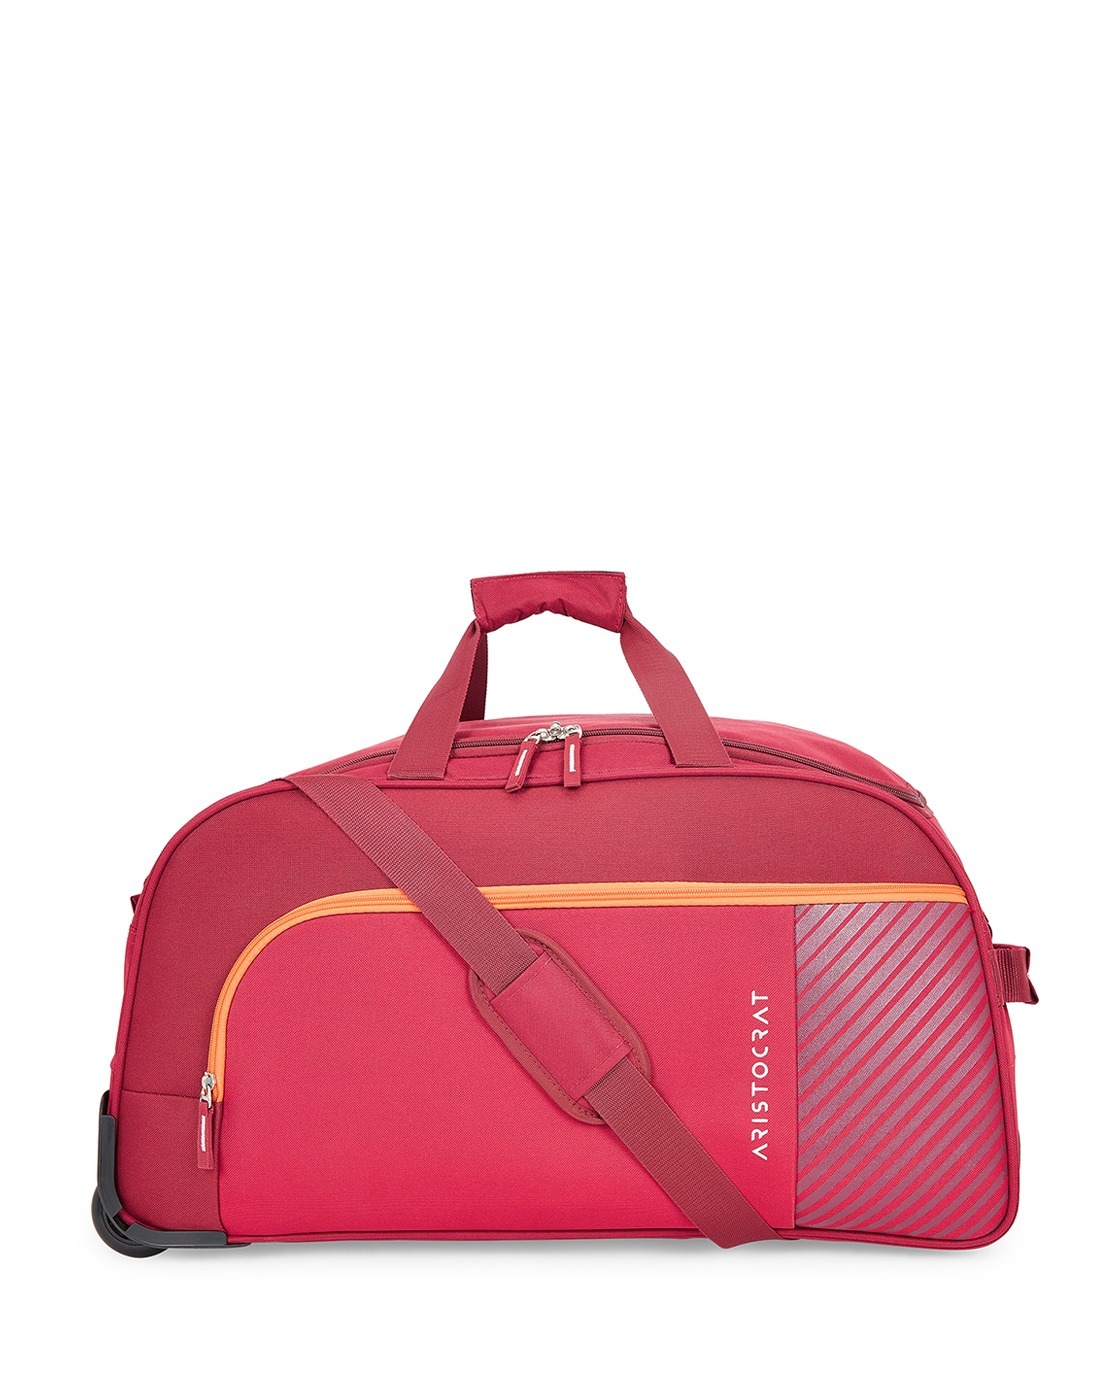 Aristocrat PolyestAristocrat Polyester 63 cms Red Travel Duffle (Rookie)er  63 cms Red Travel Duffle (Rookie) - Packaging Supply Store | Packaging  Material & t-shirt Online in India - utrustindia